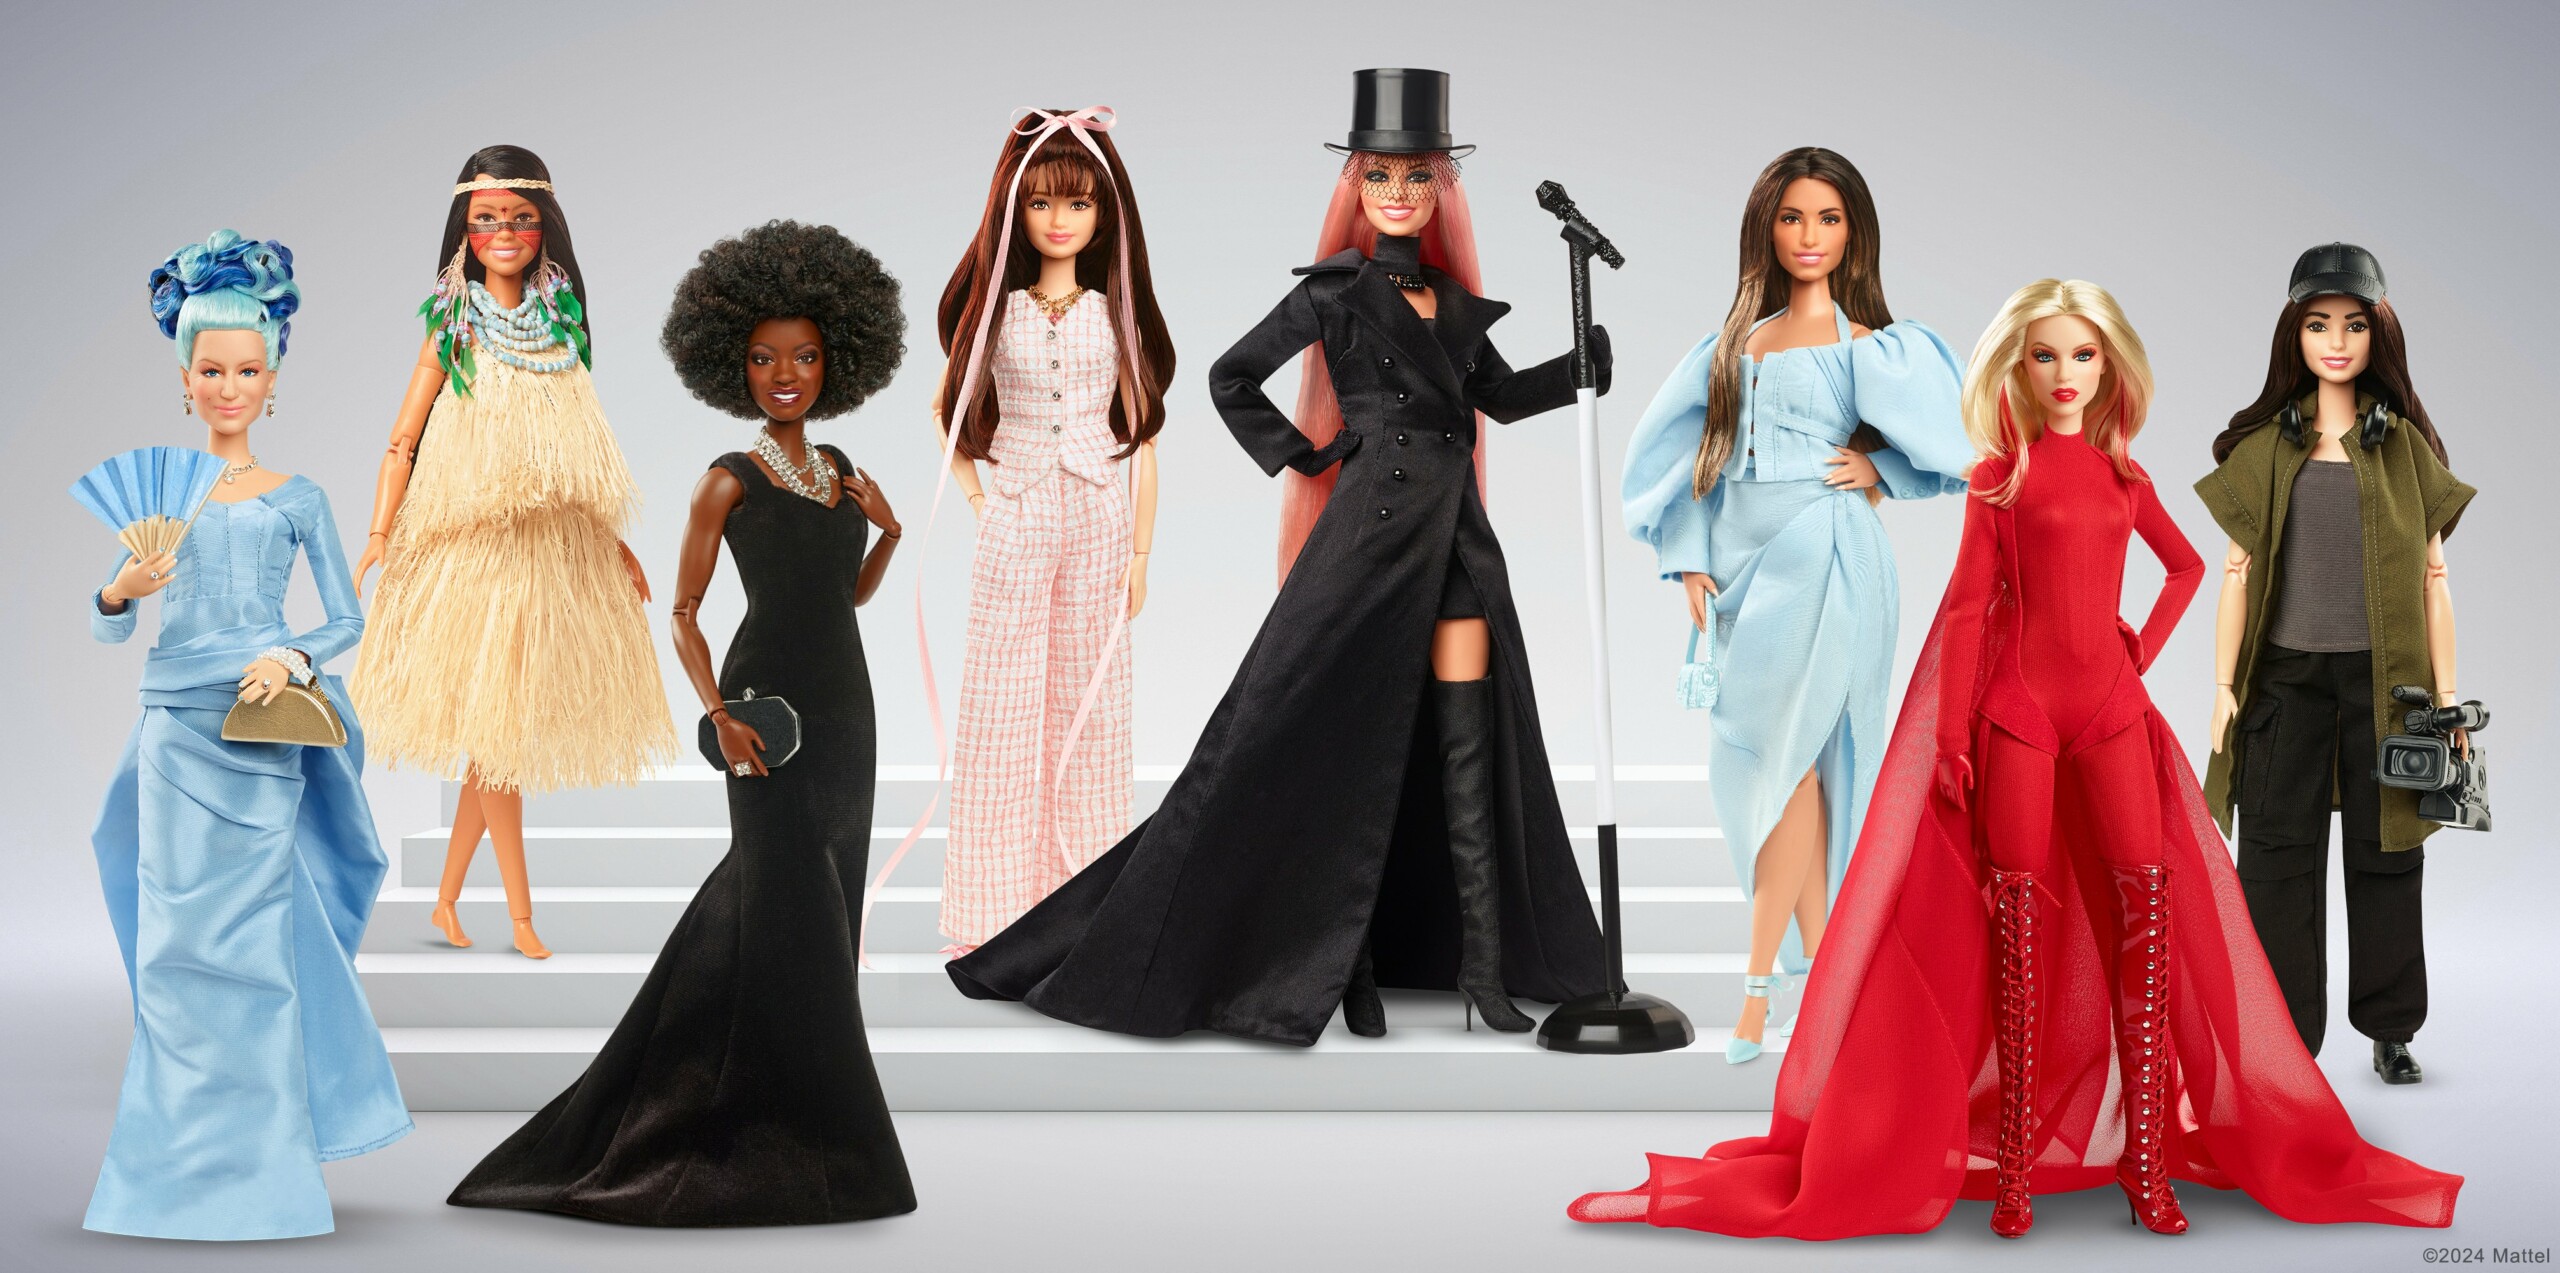 barbie-is-celebrating-65-years-with-8-new-role-model-dolls